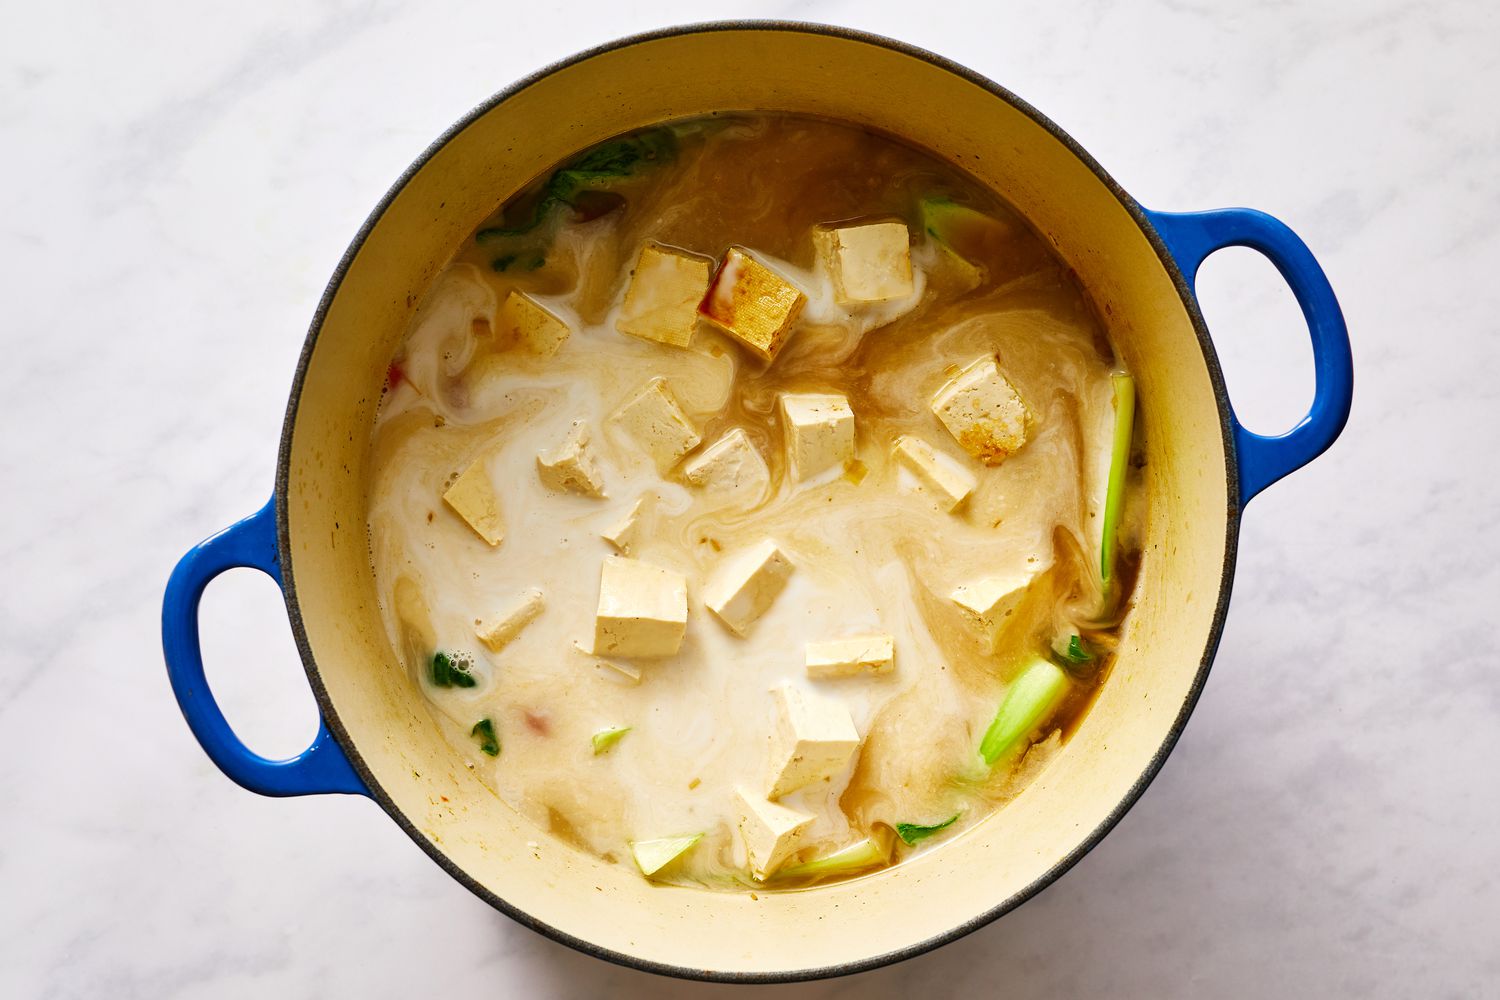 Coconut milk and tofu added to soup pot